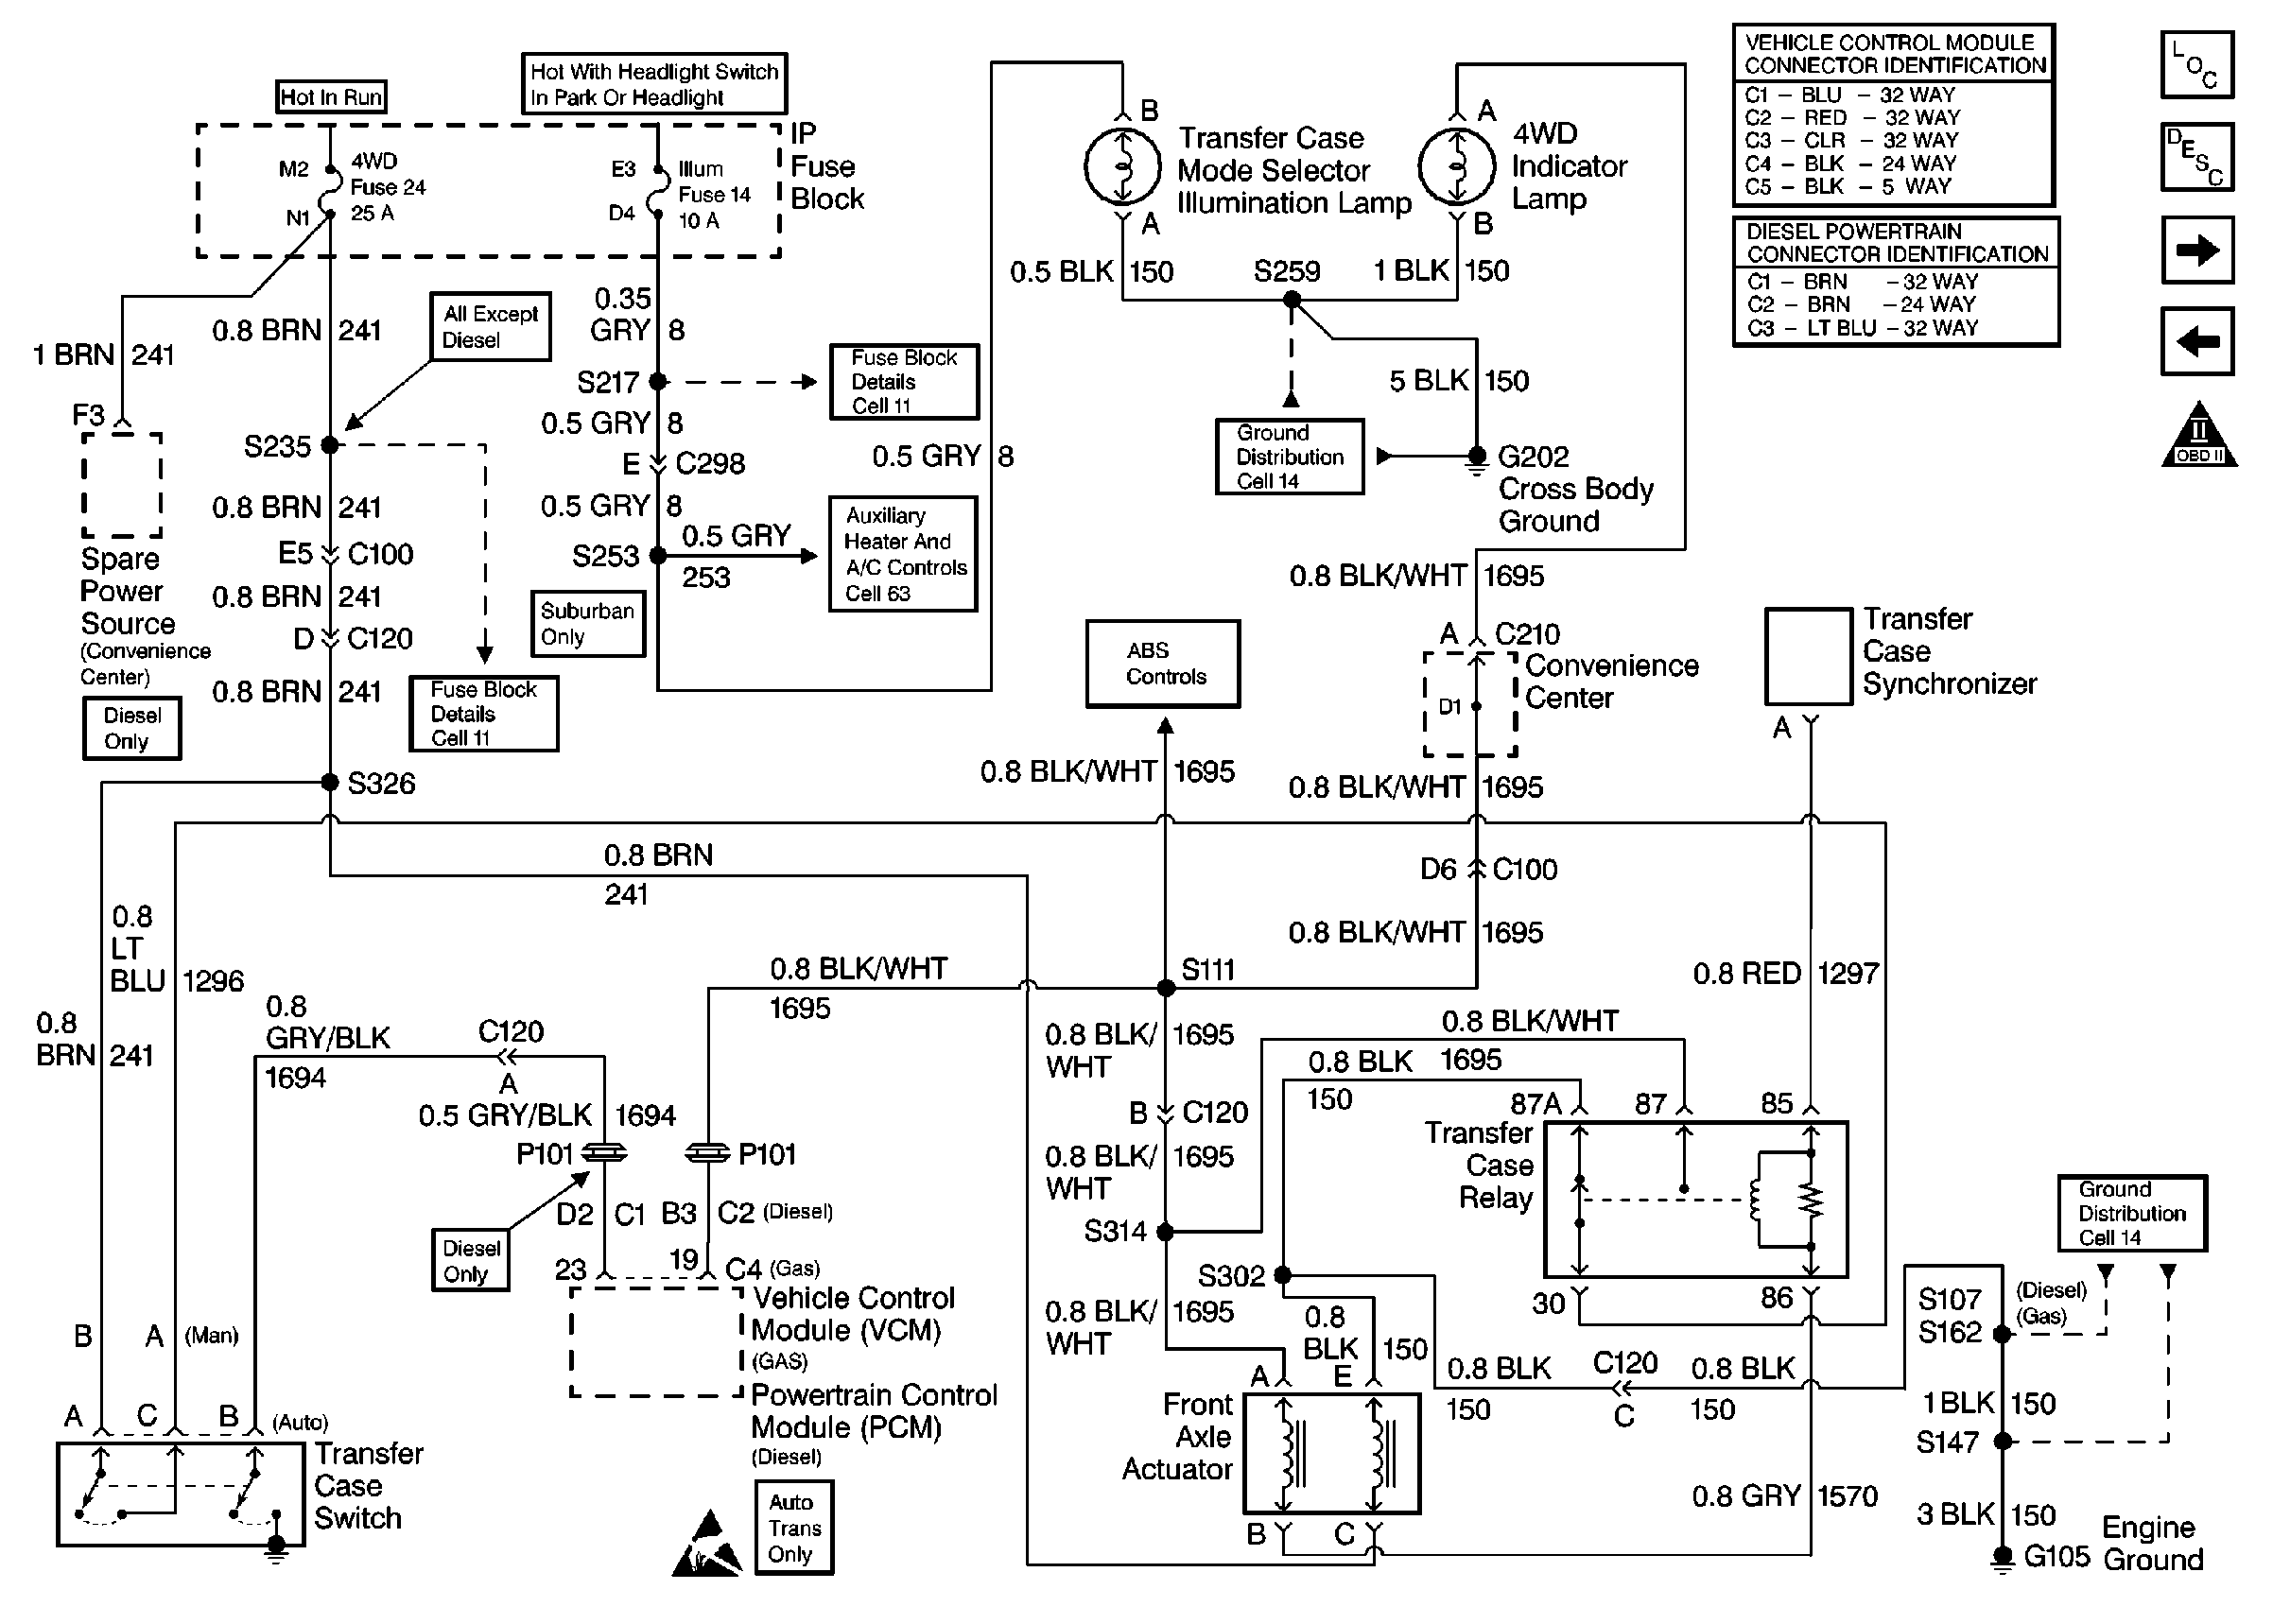 Chevy 4Wd Actuator Upgrade Wiring Diagram from www.pswired.com